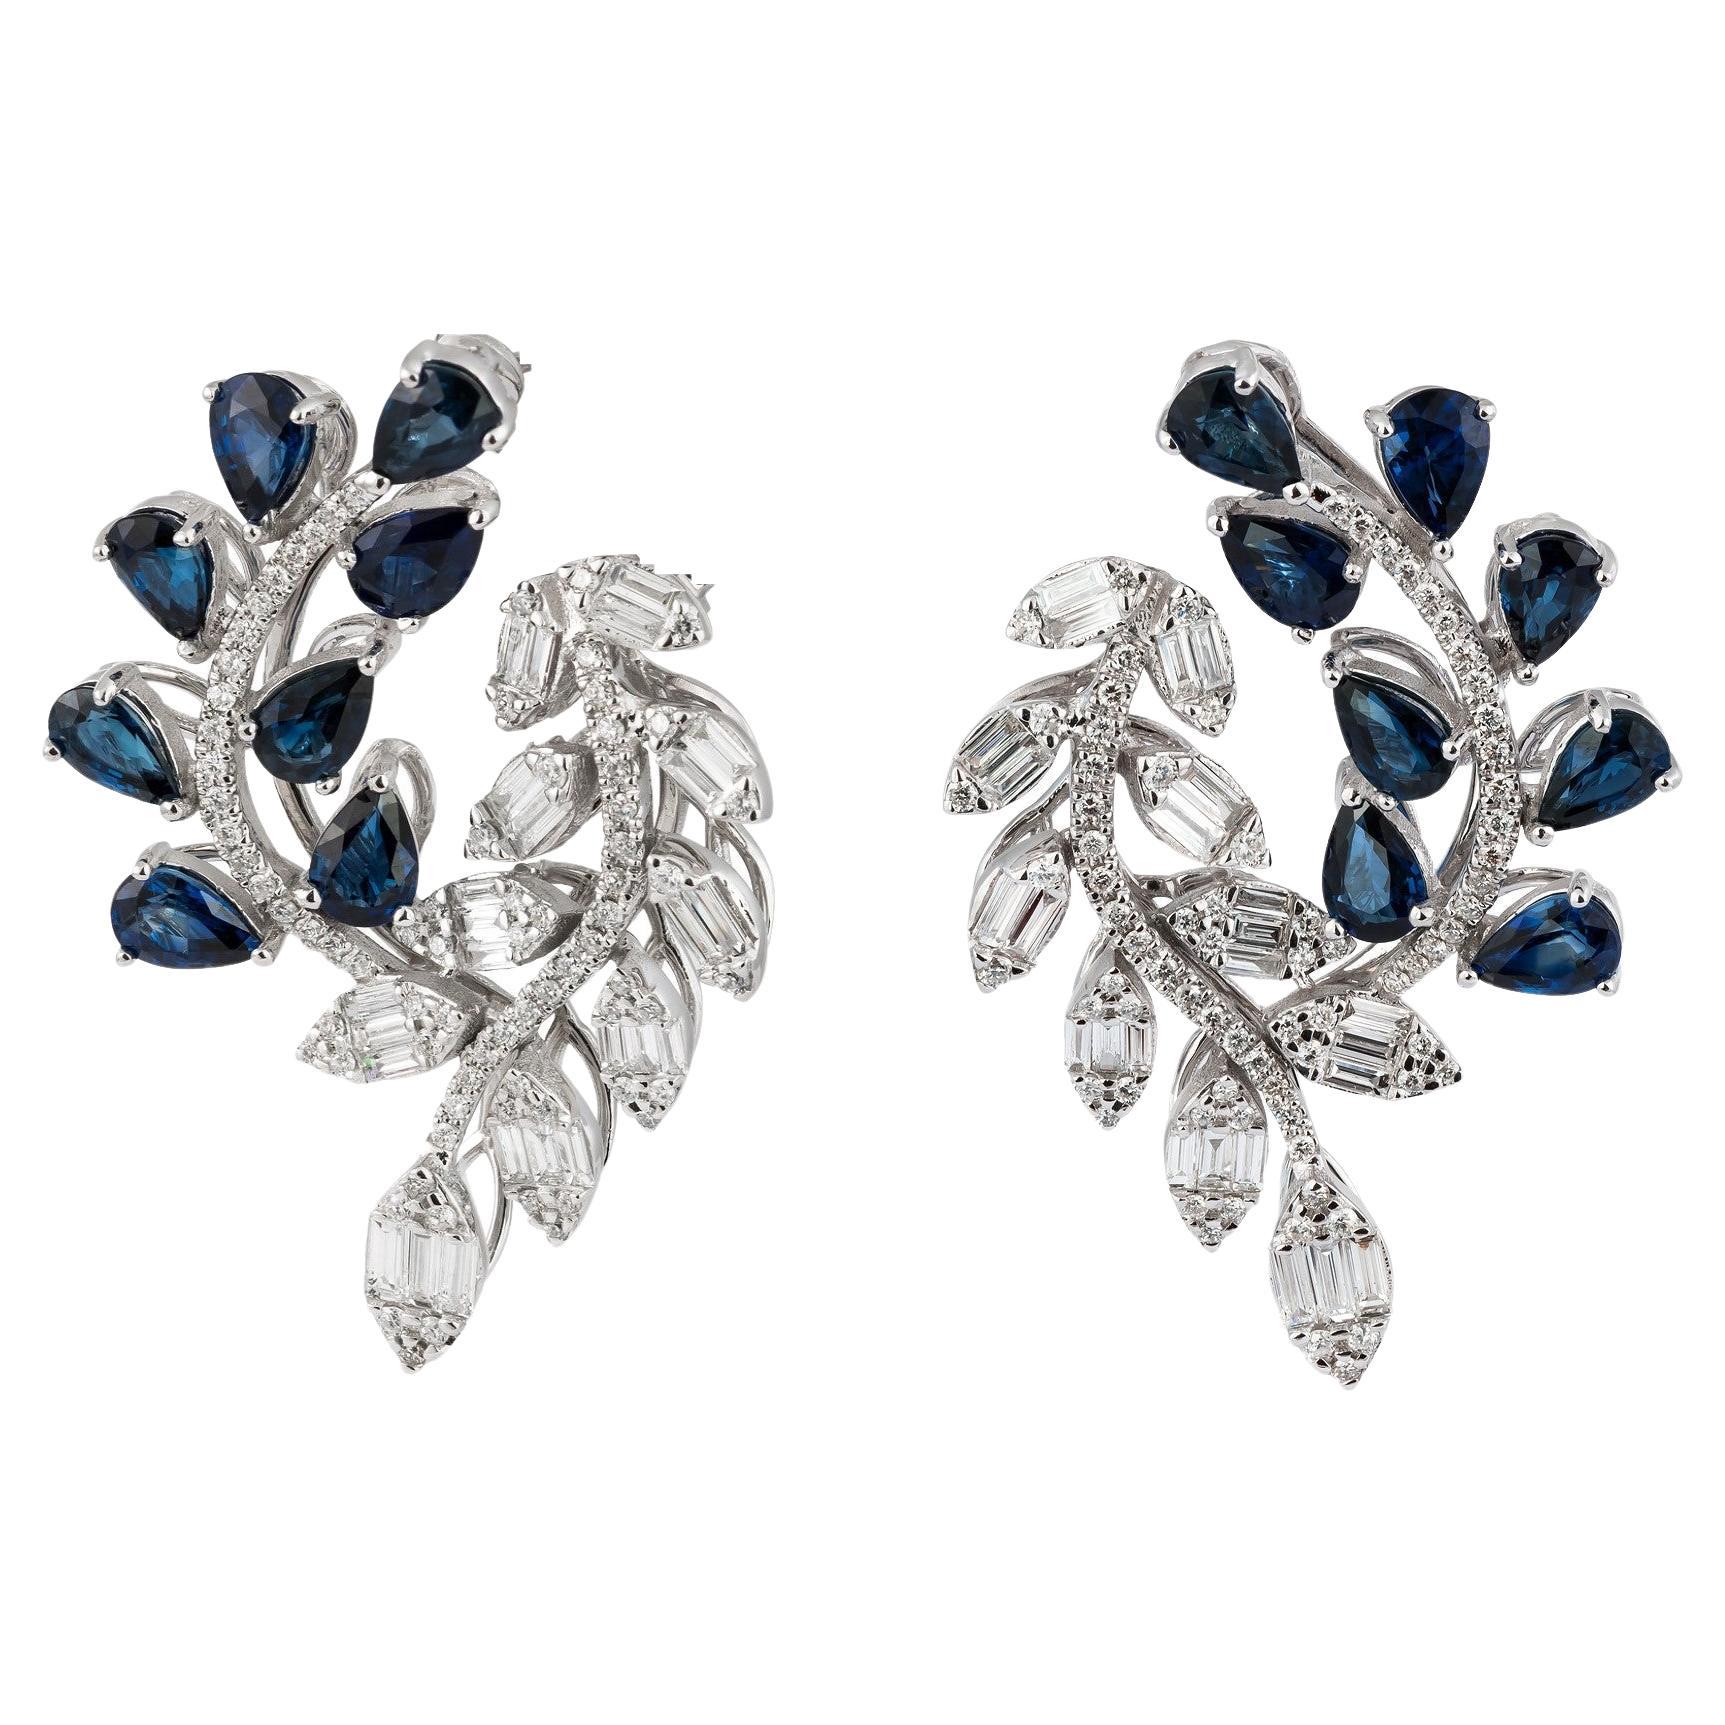 NWT $24, 000 18KT Gold Glittering Blue Sapphire Diamond Floral Leaf Earrings For Sale